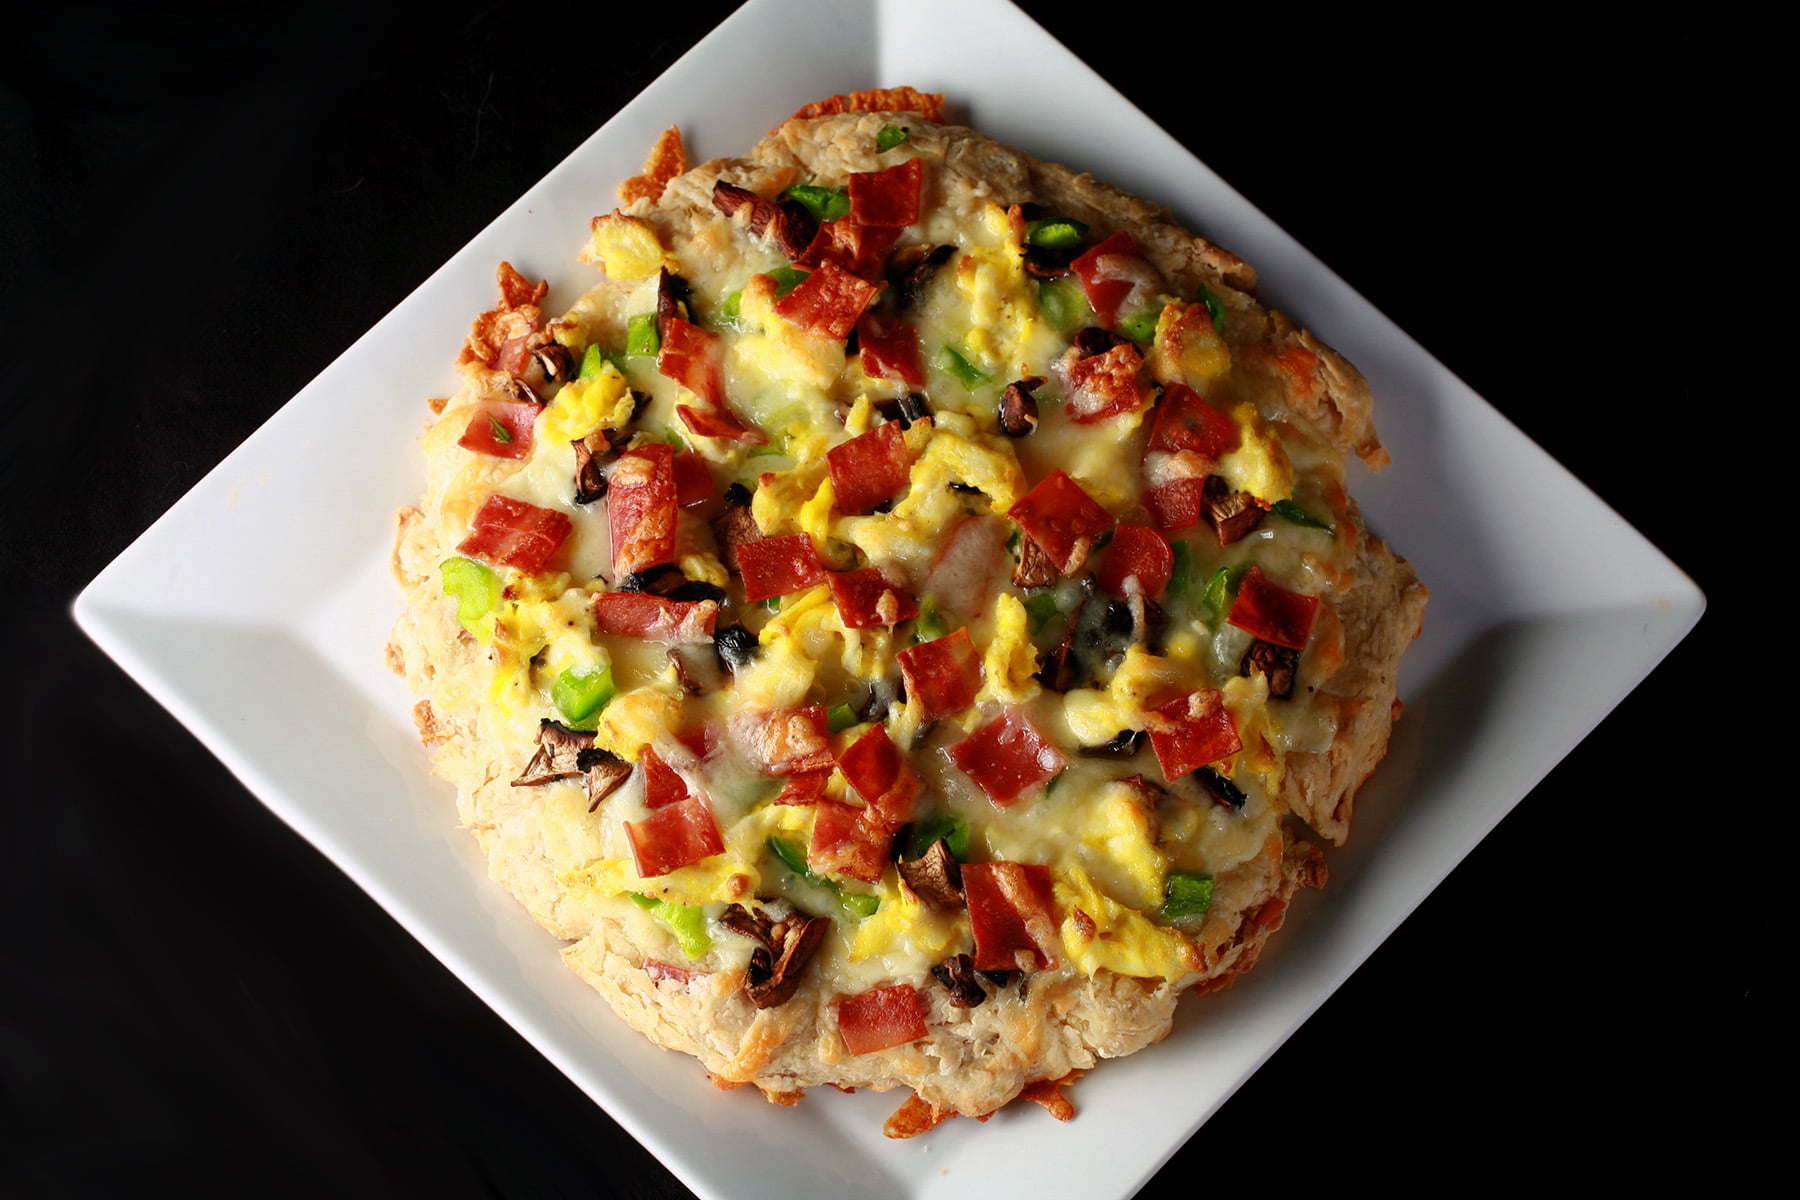 A large breakfast biscuit pizza.